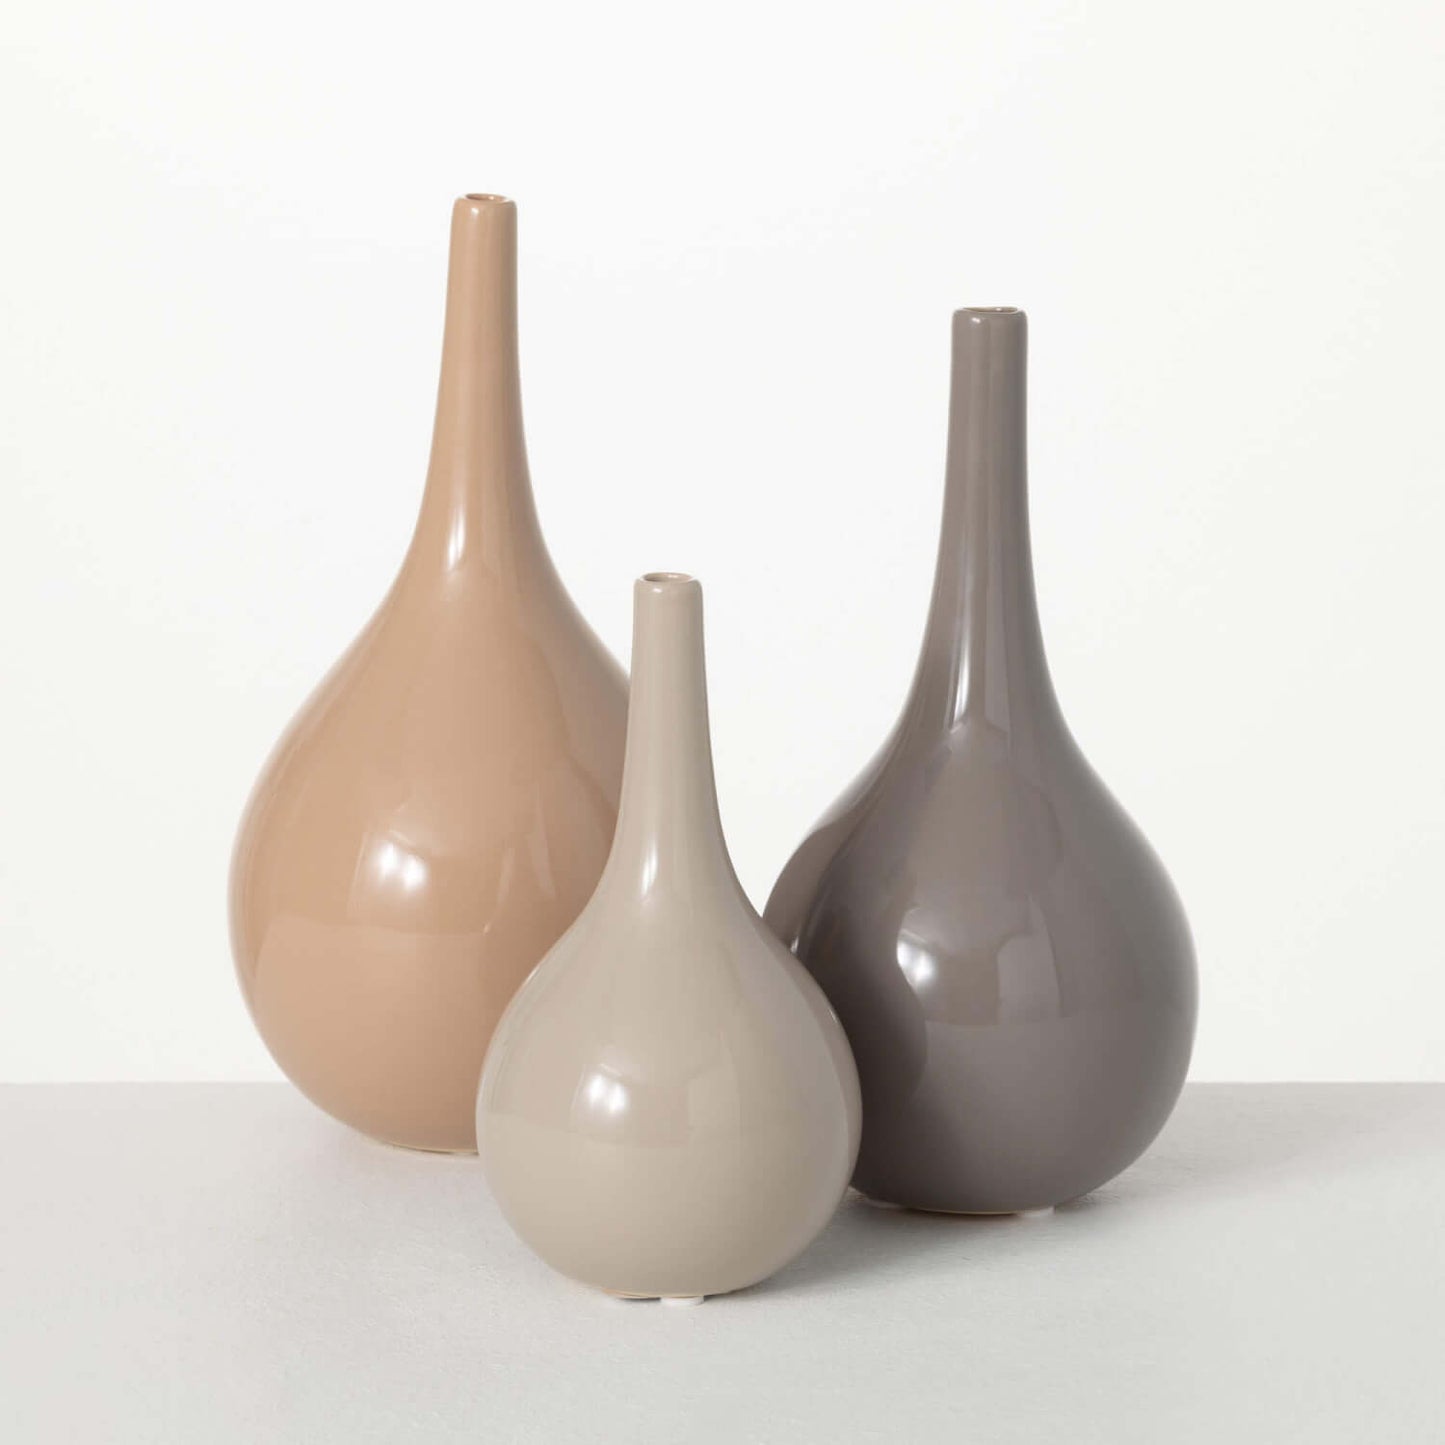 Warm Glossy Vases | 3 Assorted